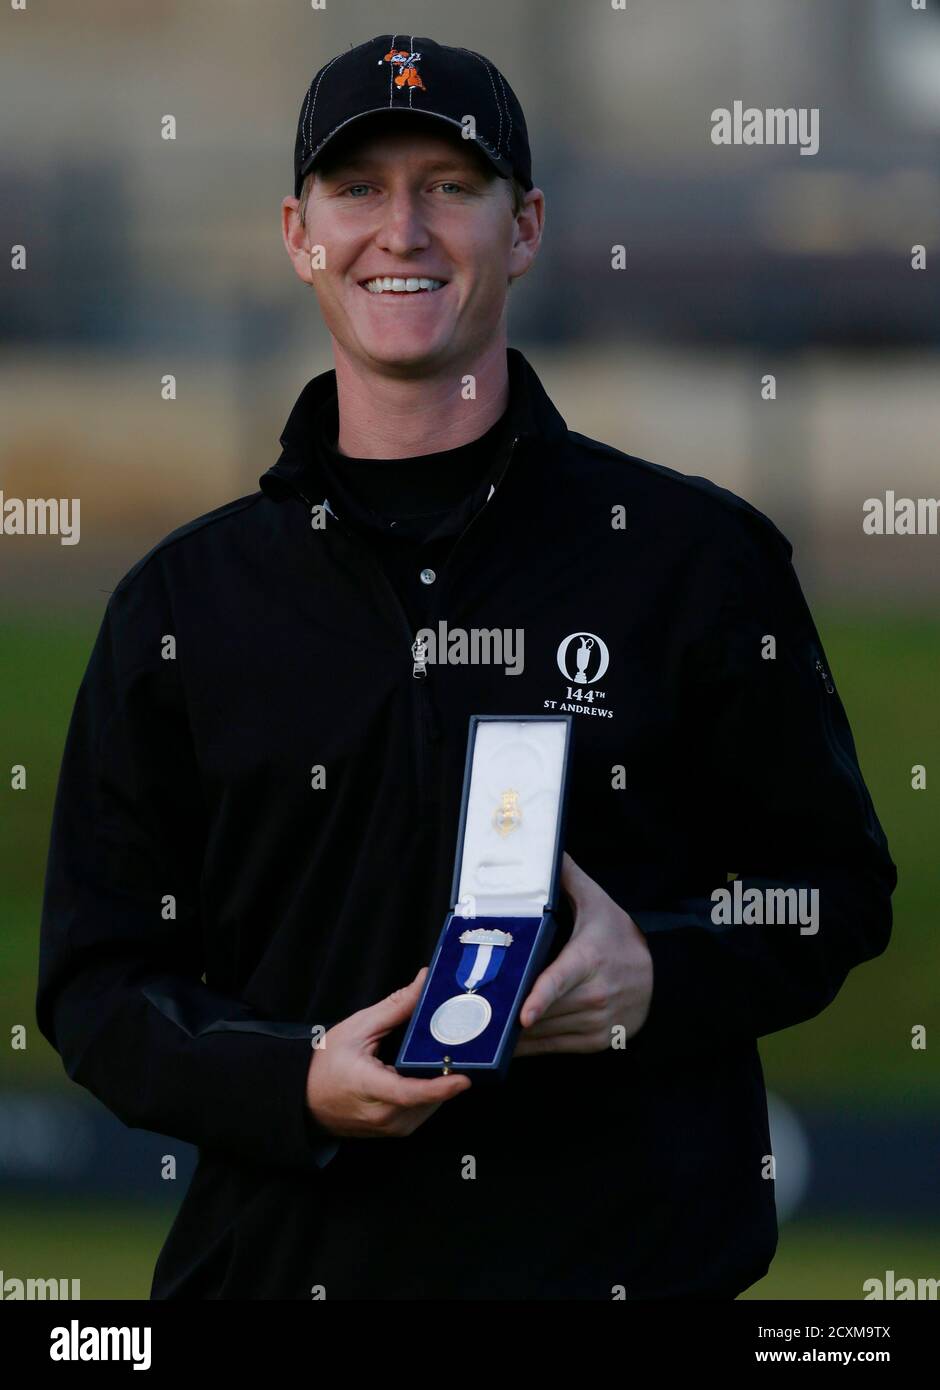 Jordan Niebrugge of the U.S. celebrates with the silver medal after finishing as the leading amateur of the British Open golf championship on the Old Course in St. Andrews, Scotland, July 20, 2015.       REUTERS/Russell Cheyne Stock Photo